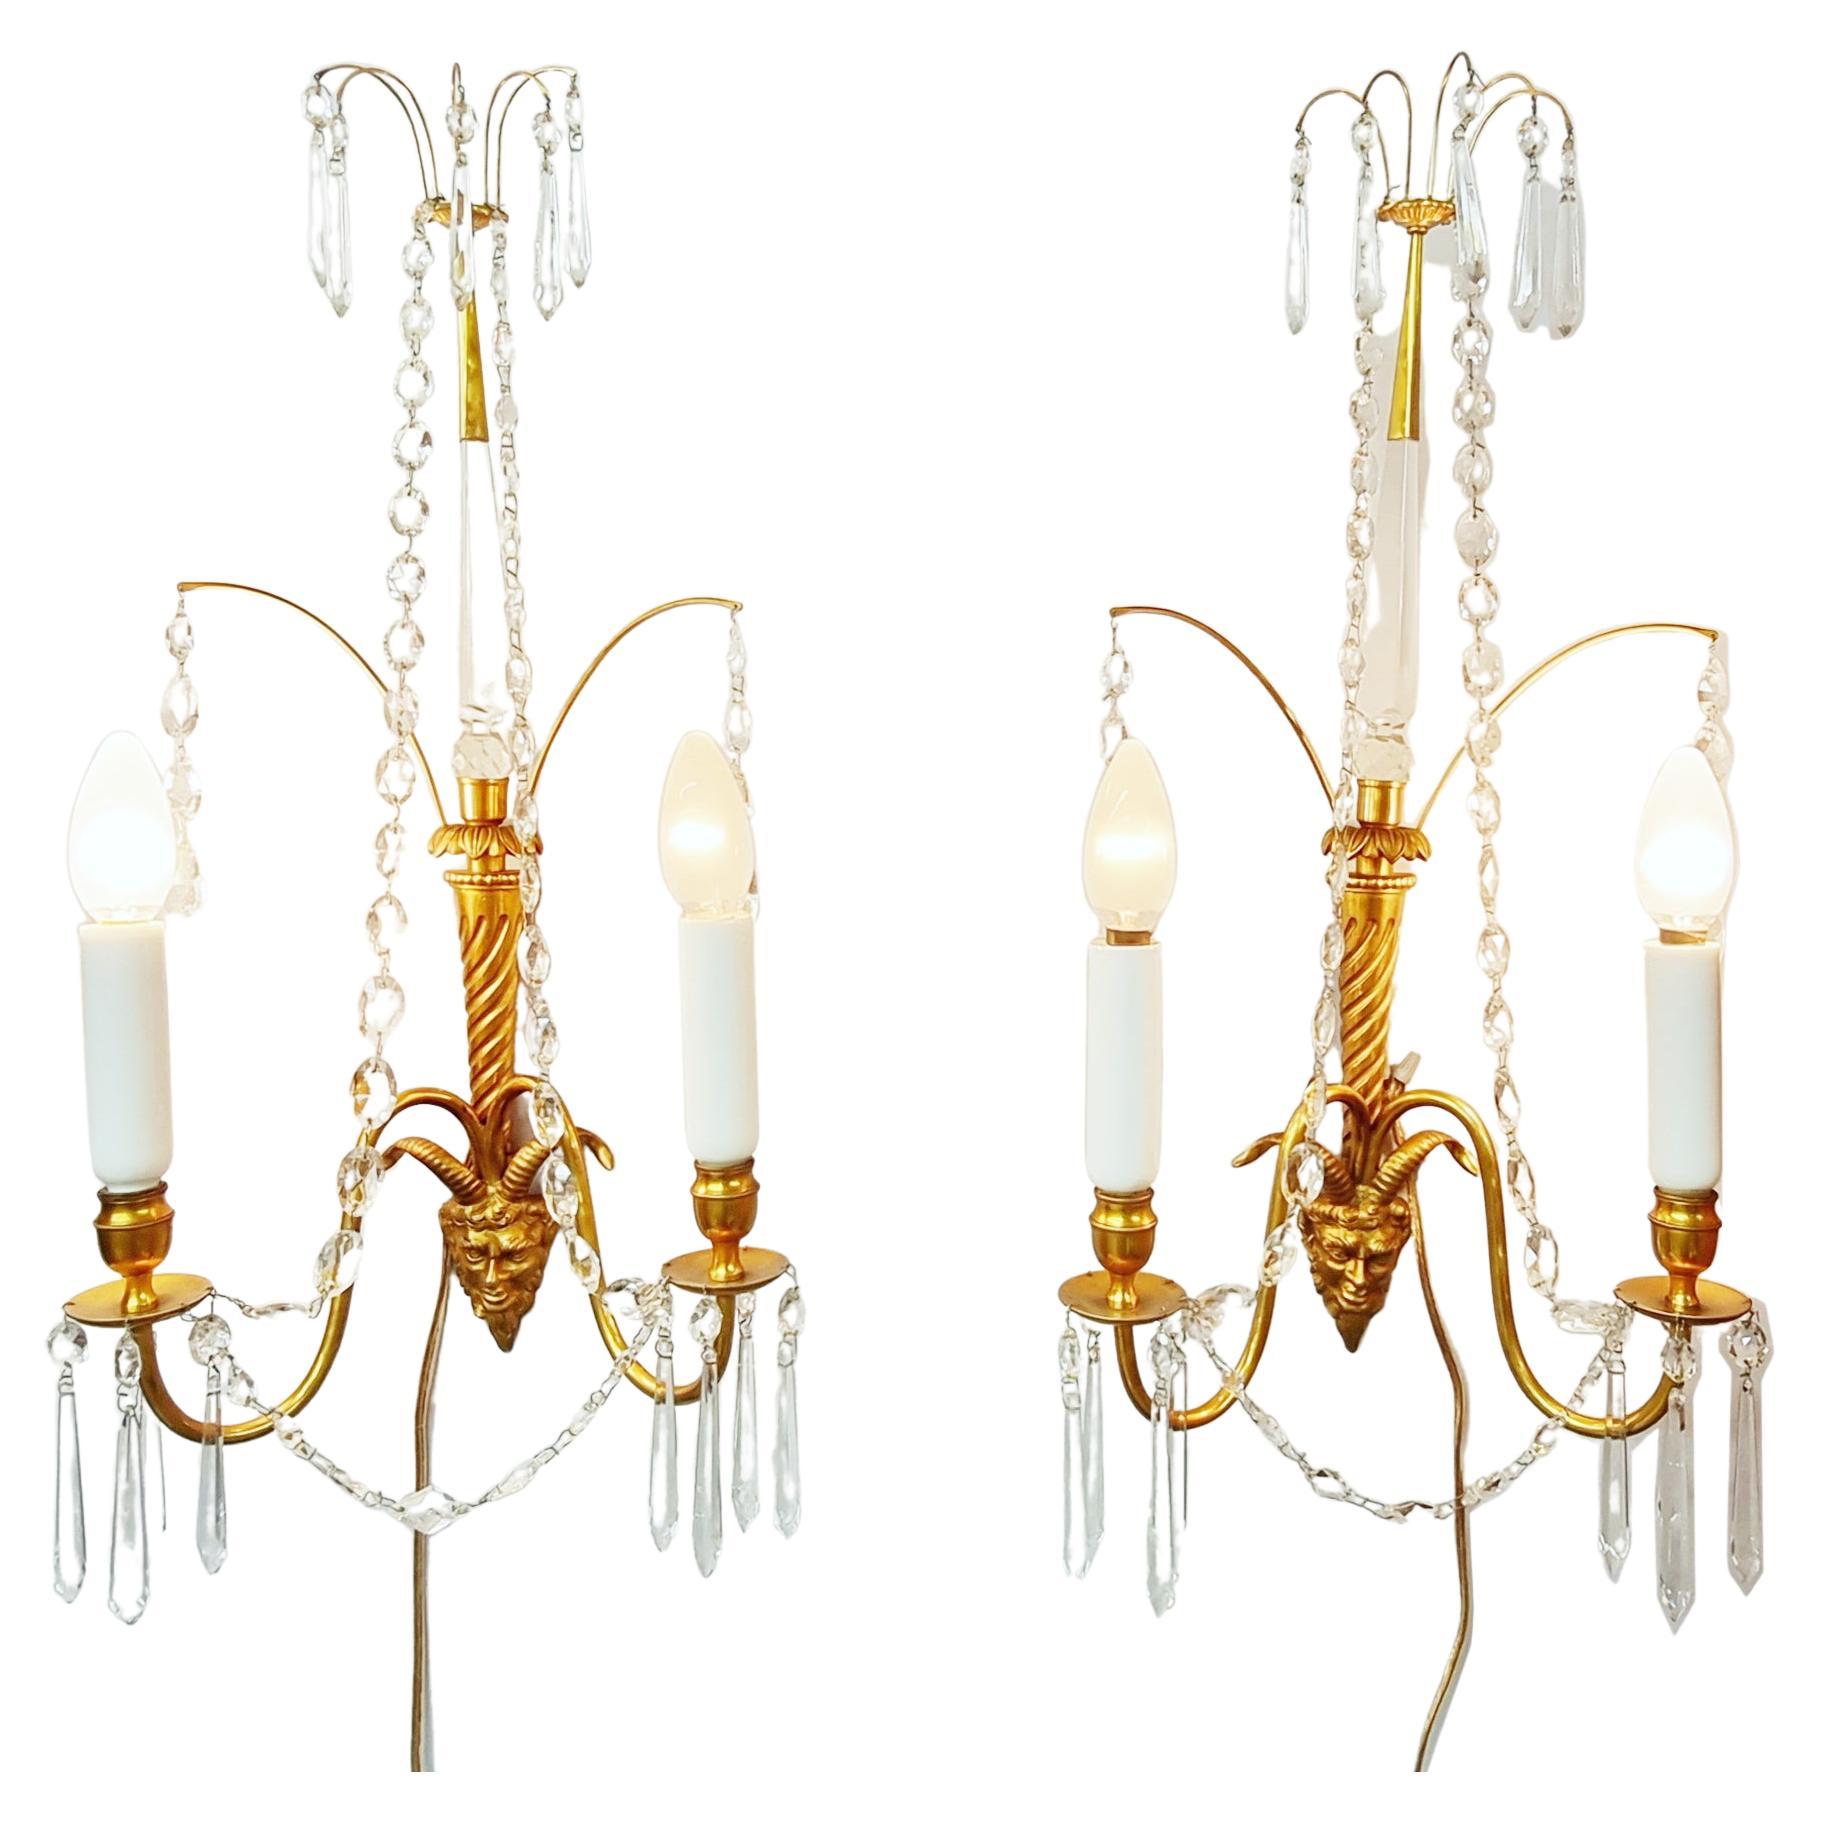 Pair of Baltic Gilt Satyr Faun Head Wall Sconces, Late 19th / Early 20th Century